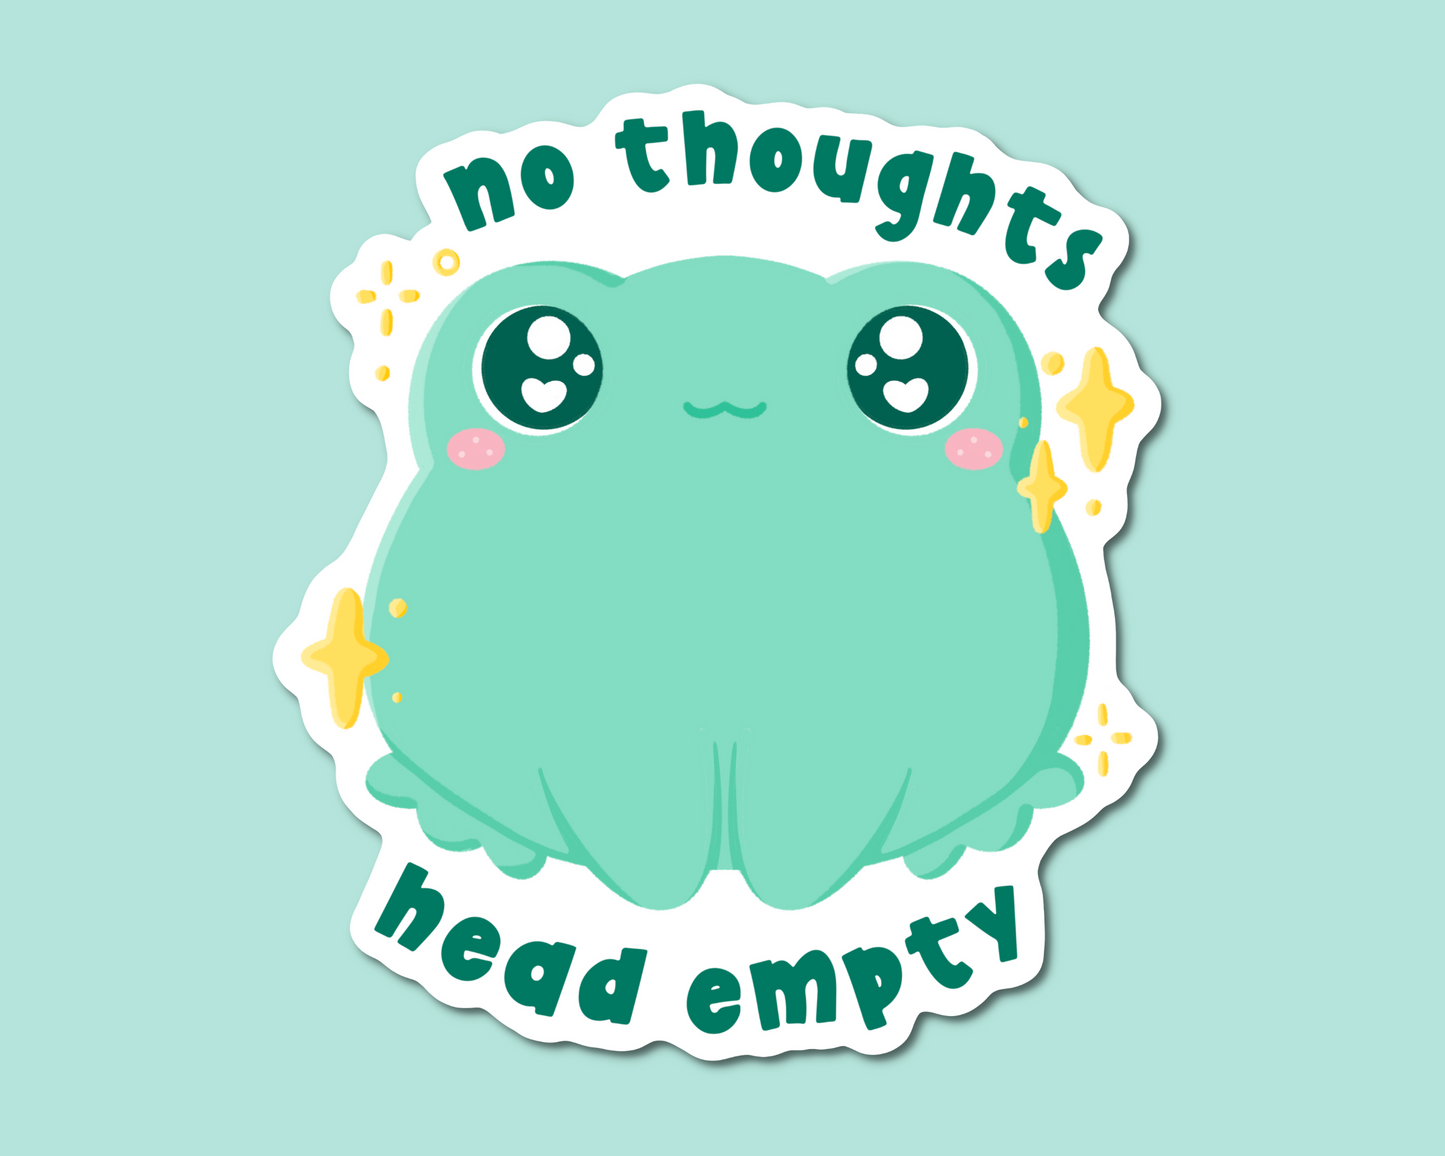 No Thoughts Head Empty Frog Sticker